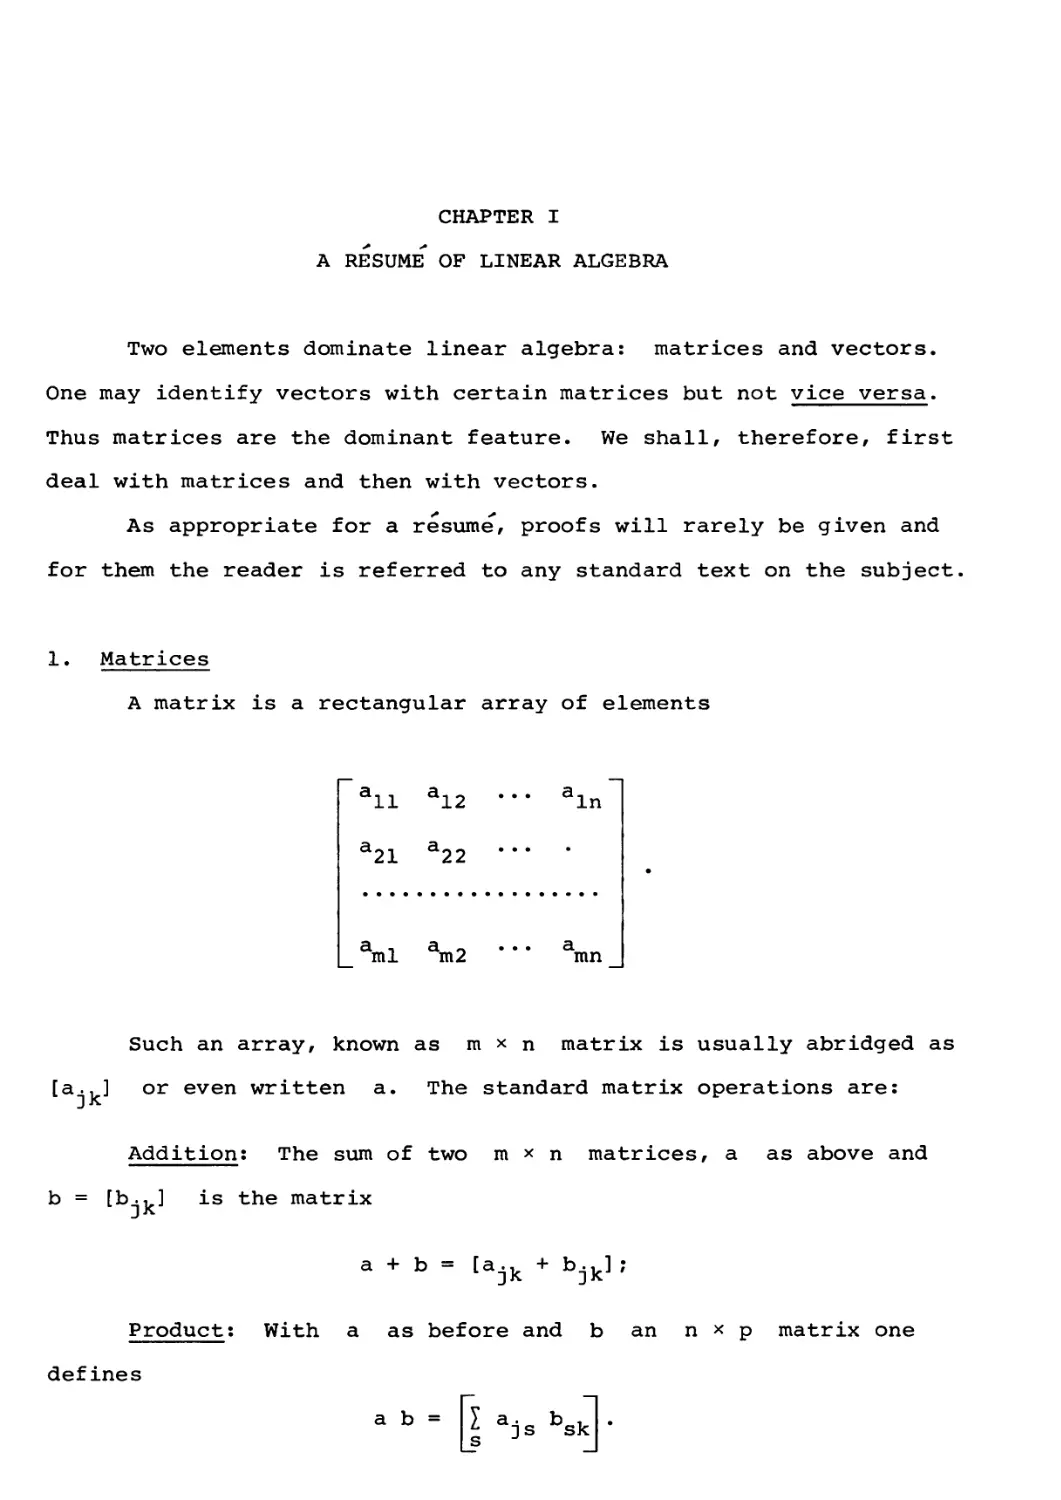 CHAPTER I. A RESUME OF LINEAR ALGEBRA